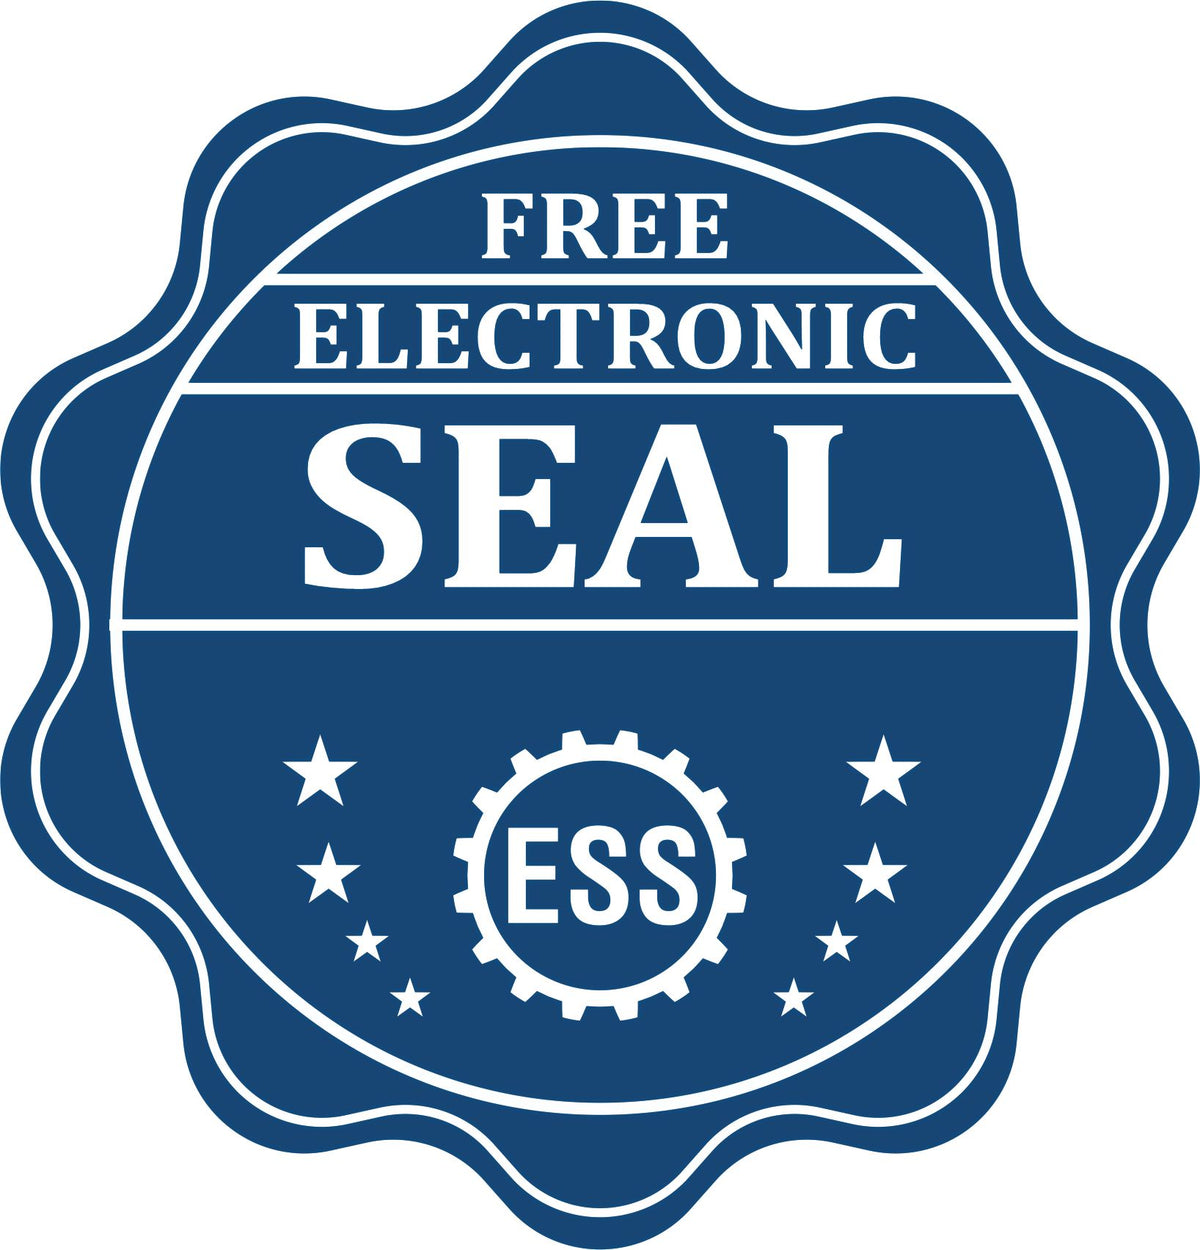 A badge showing a free electronic seal for the Hybrid North Dakota Architect Seal with stars and the ESS gear on the emblem.